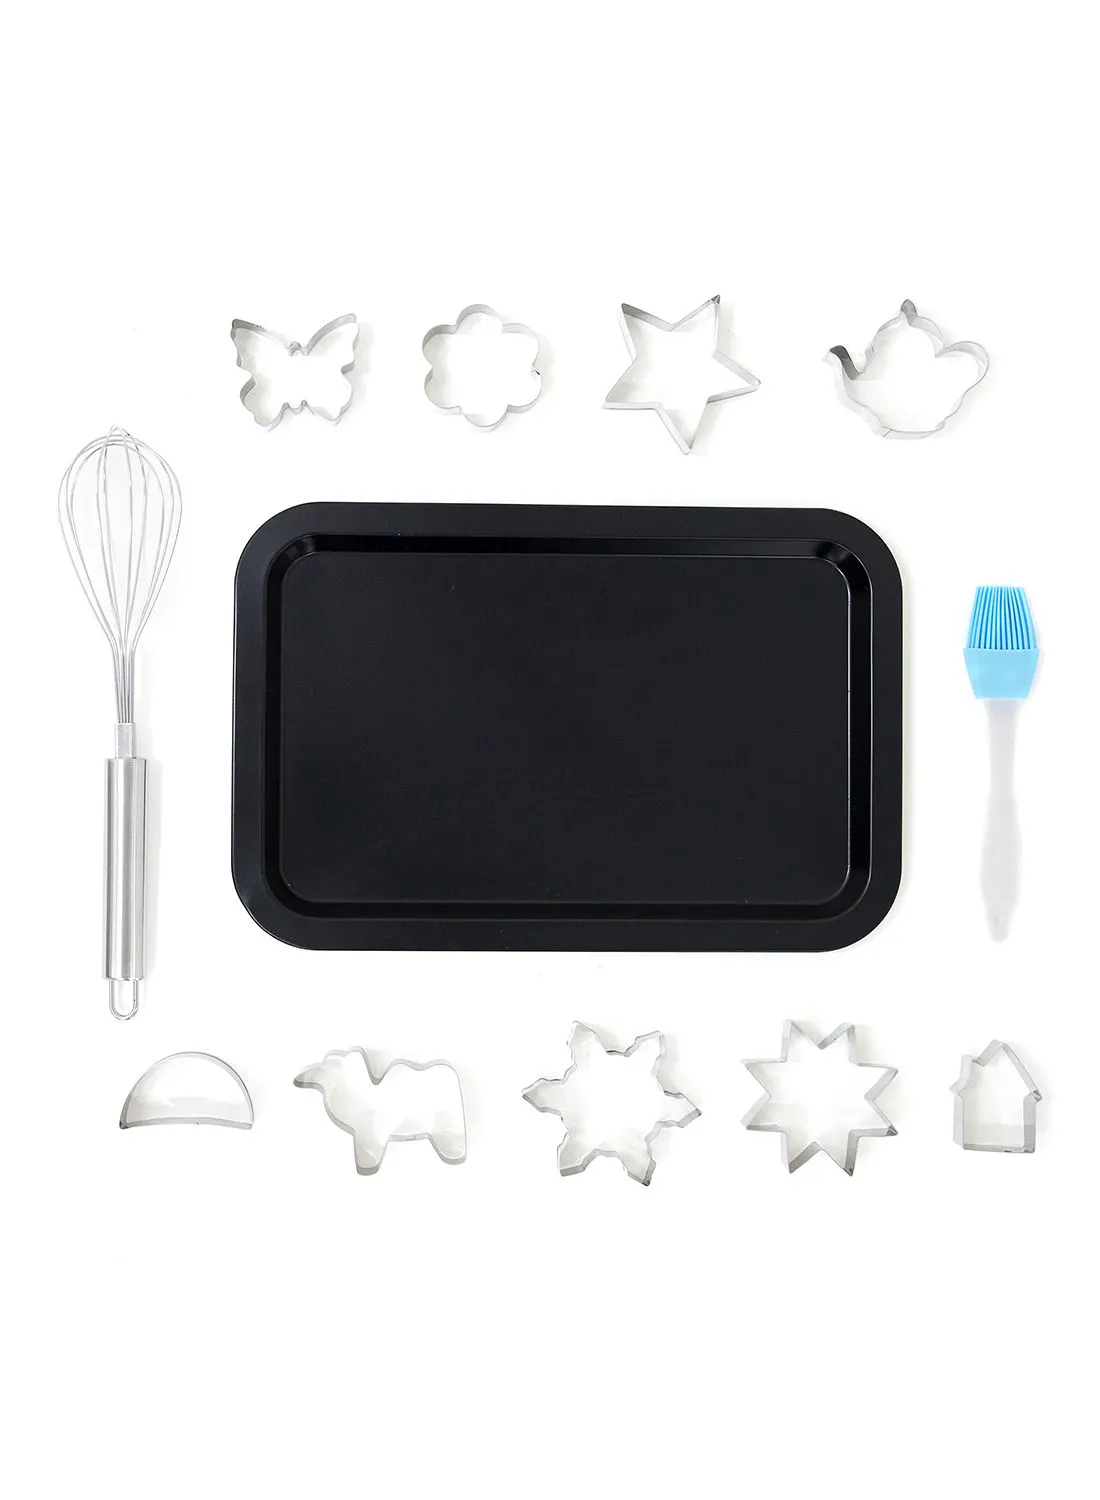 Noon East 12 Piece Oven Pan Set - Made Of Carbon Steel - Arabic Shapes - Baking Pan - Oven Trays - Cake Tray - Oven Pan - Black Black Arabic Shapes